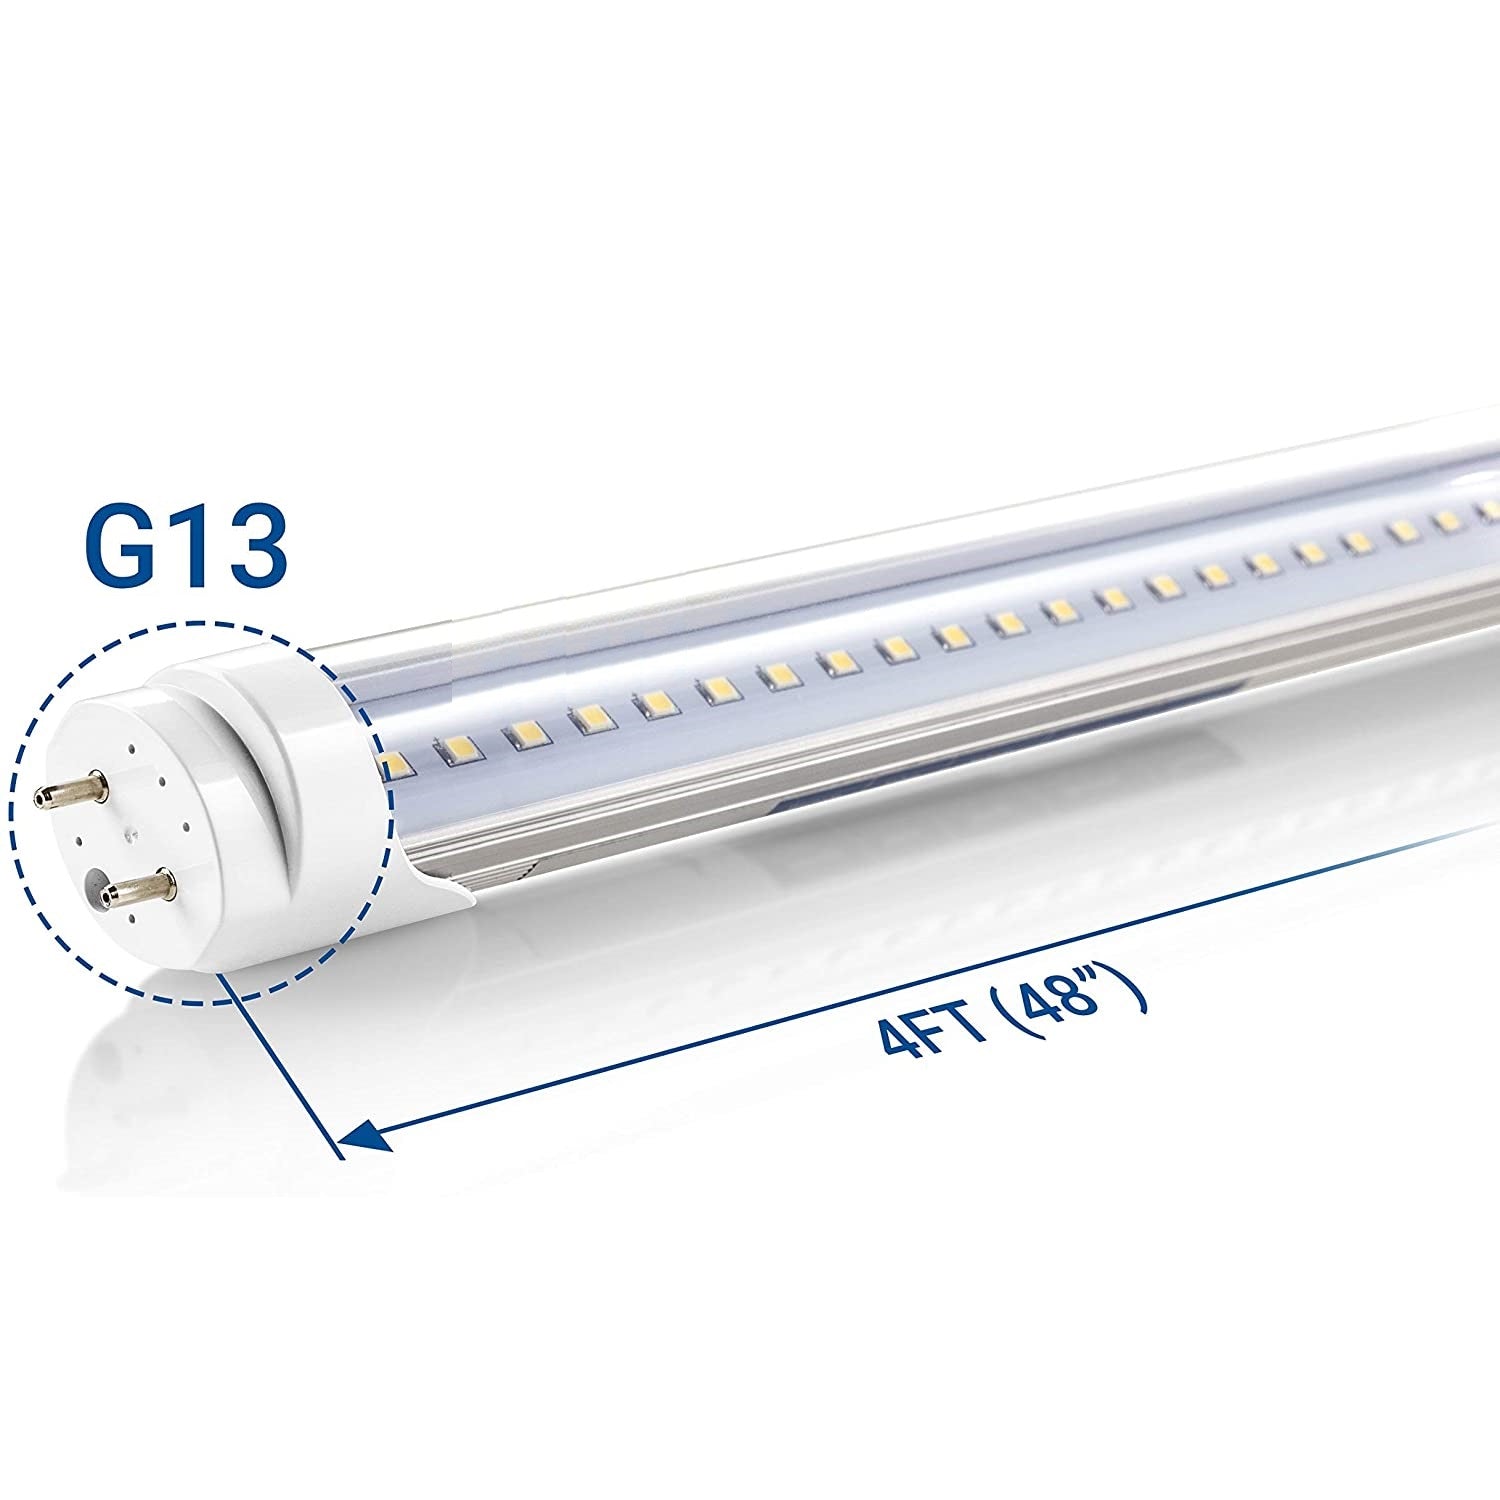 4 Pack 4 FT 18W(40W Equivalent) LED T8 Tube Light Light Bulbs, 1800LM 4000K ,48 Inch T8 Tube Lights Replacement, Dual-end Powered, Ballast Bypass - UproMax